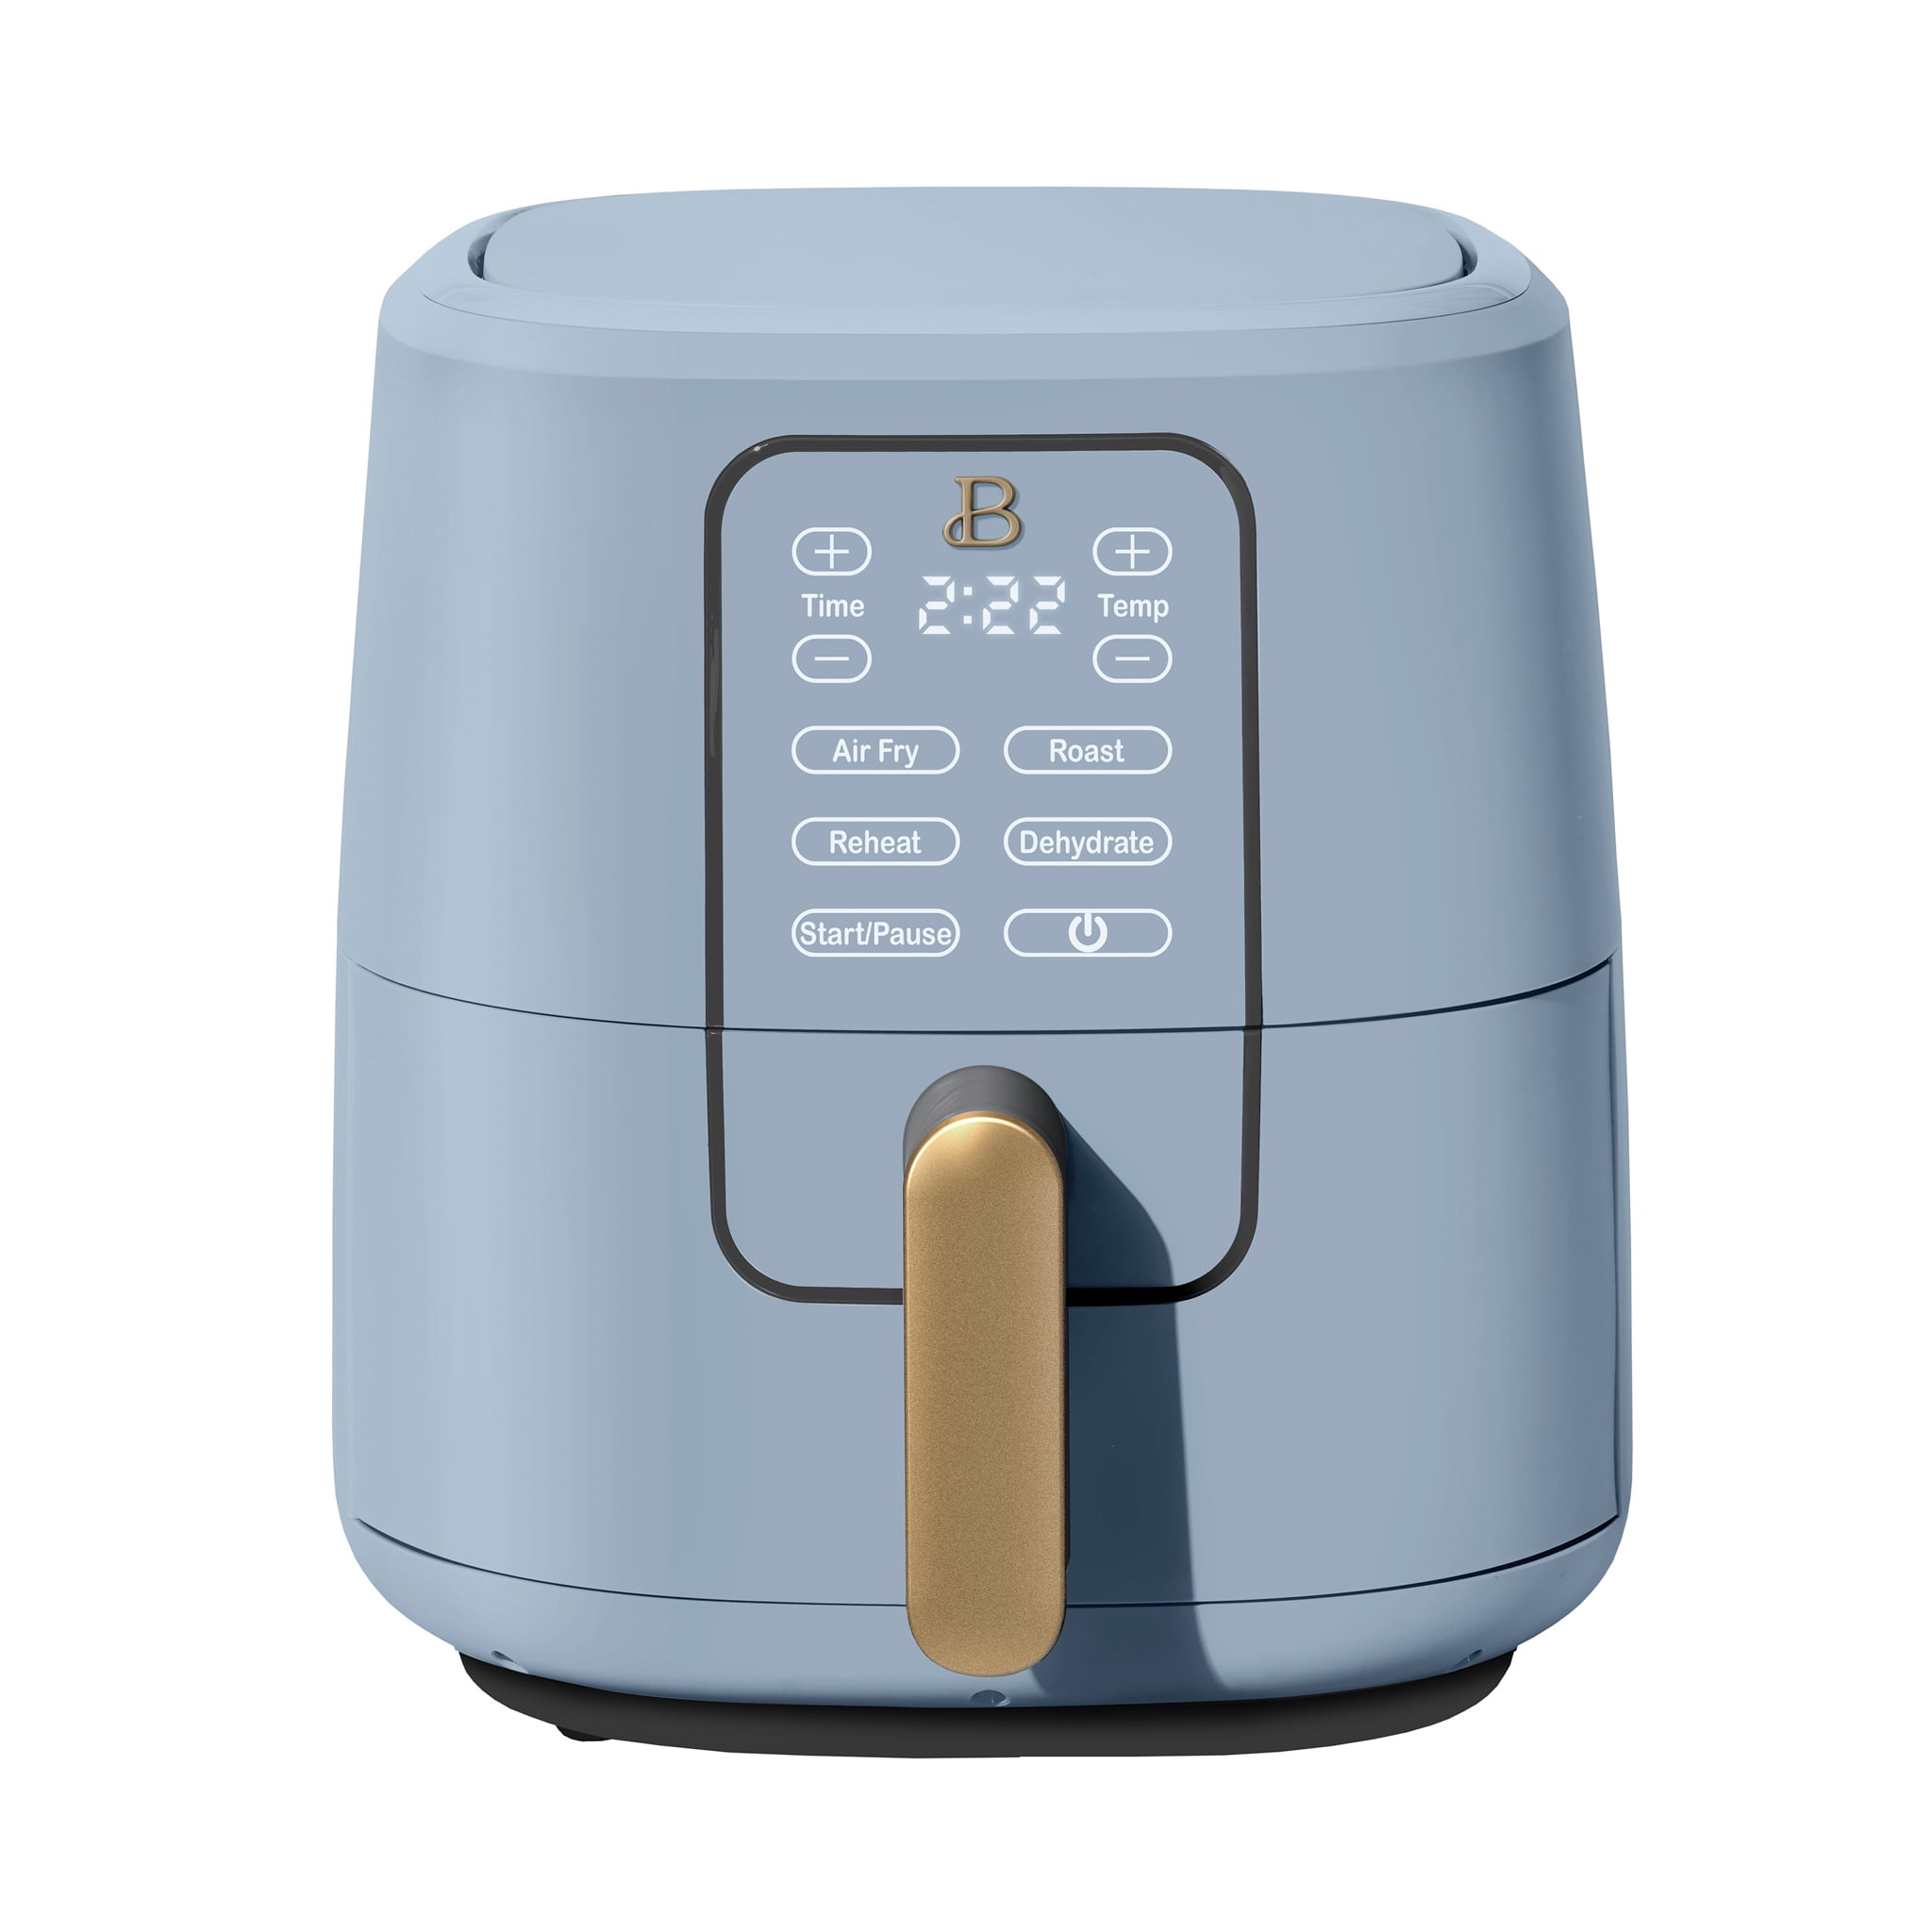 Beautiful 6 qt Air Fryer with Touch-Activated Display, Cornflower Blue by Drew Barrymore - Walmart.com